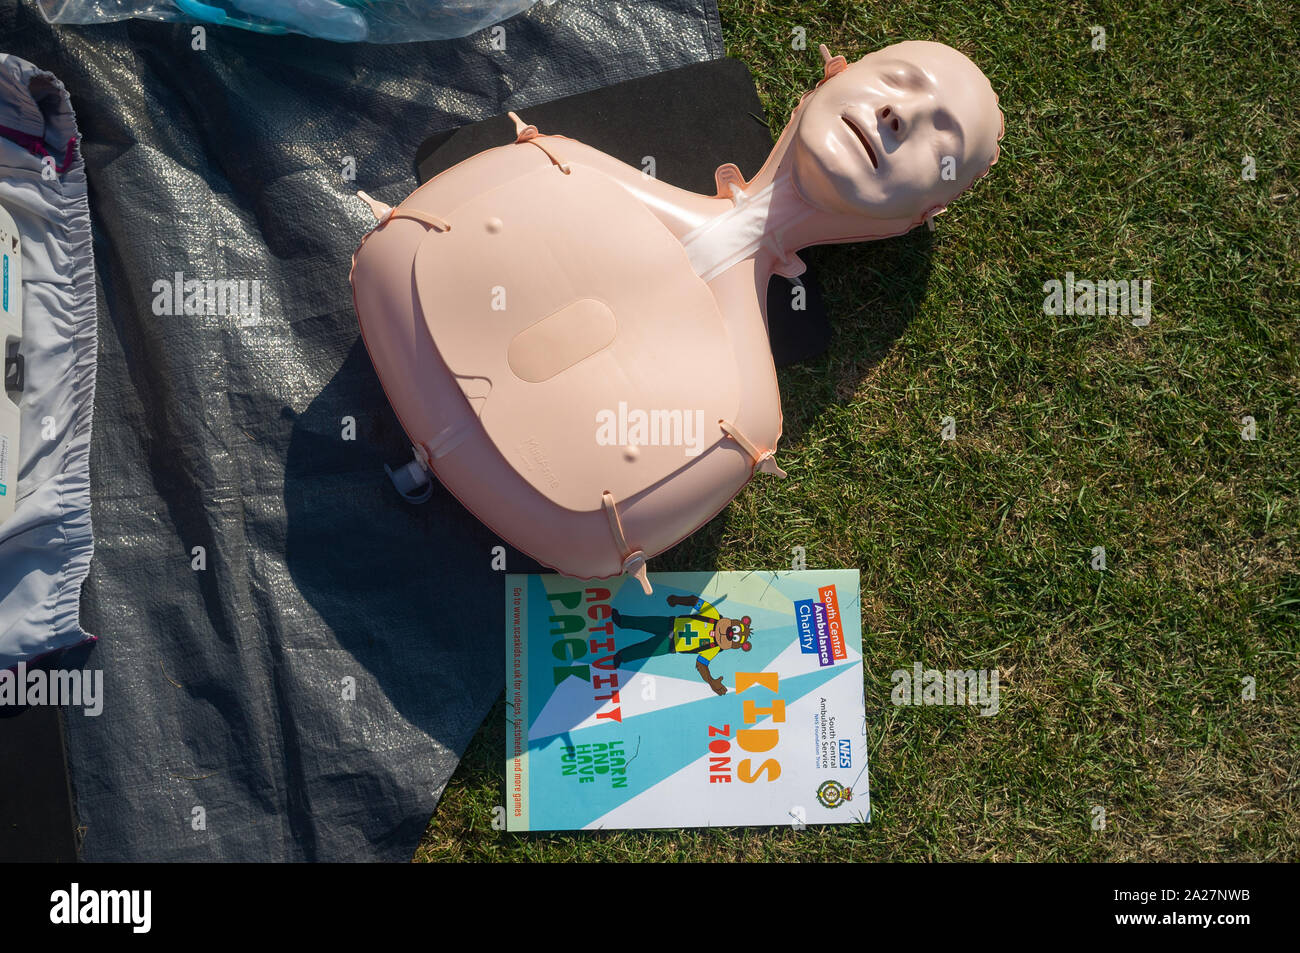 CPR and AED training dummies Stock Photo